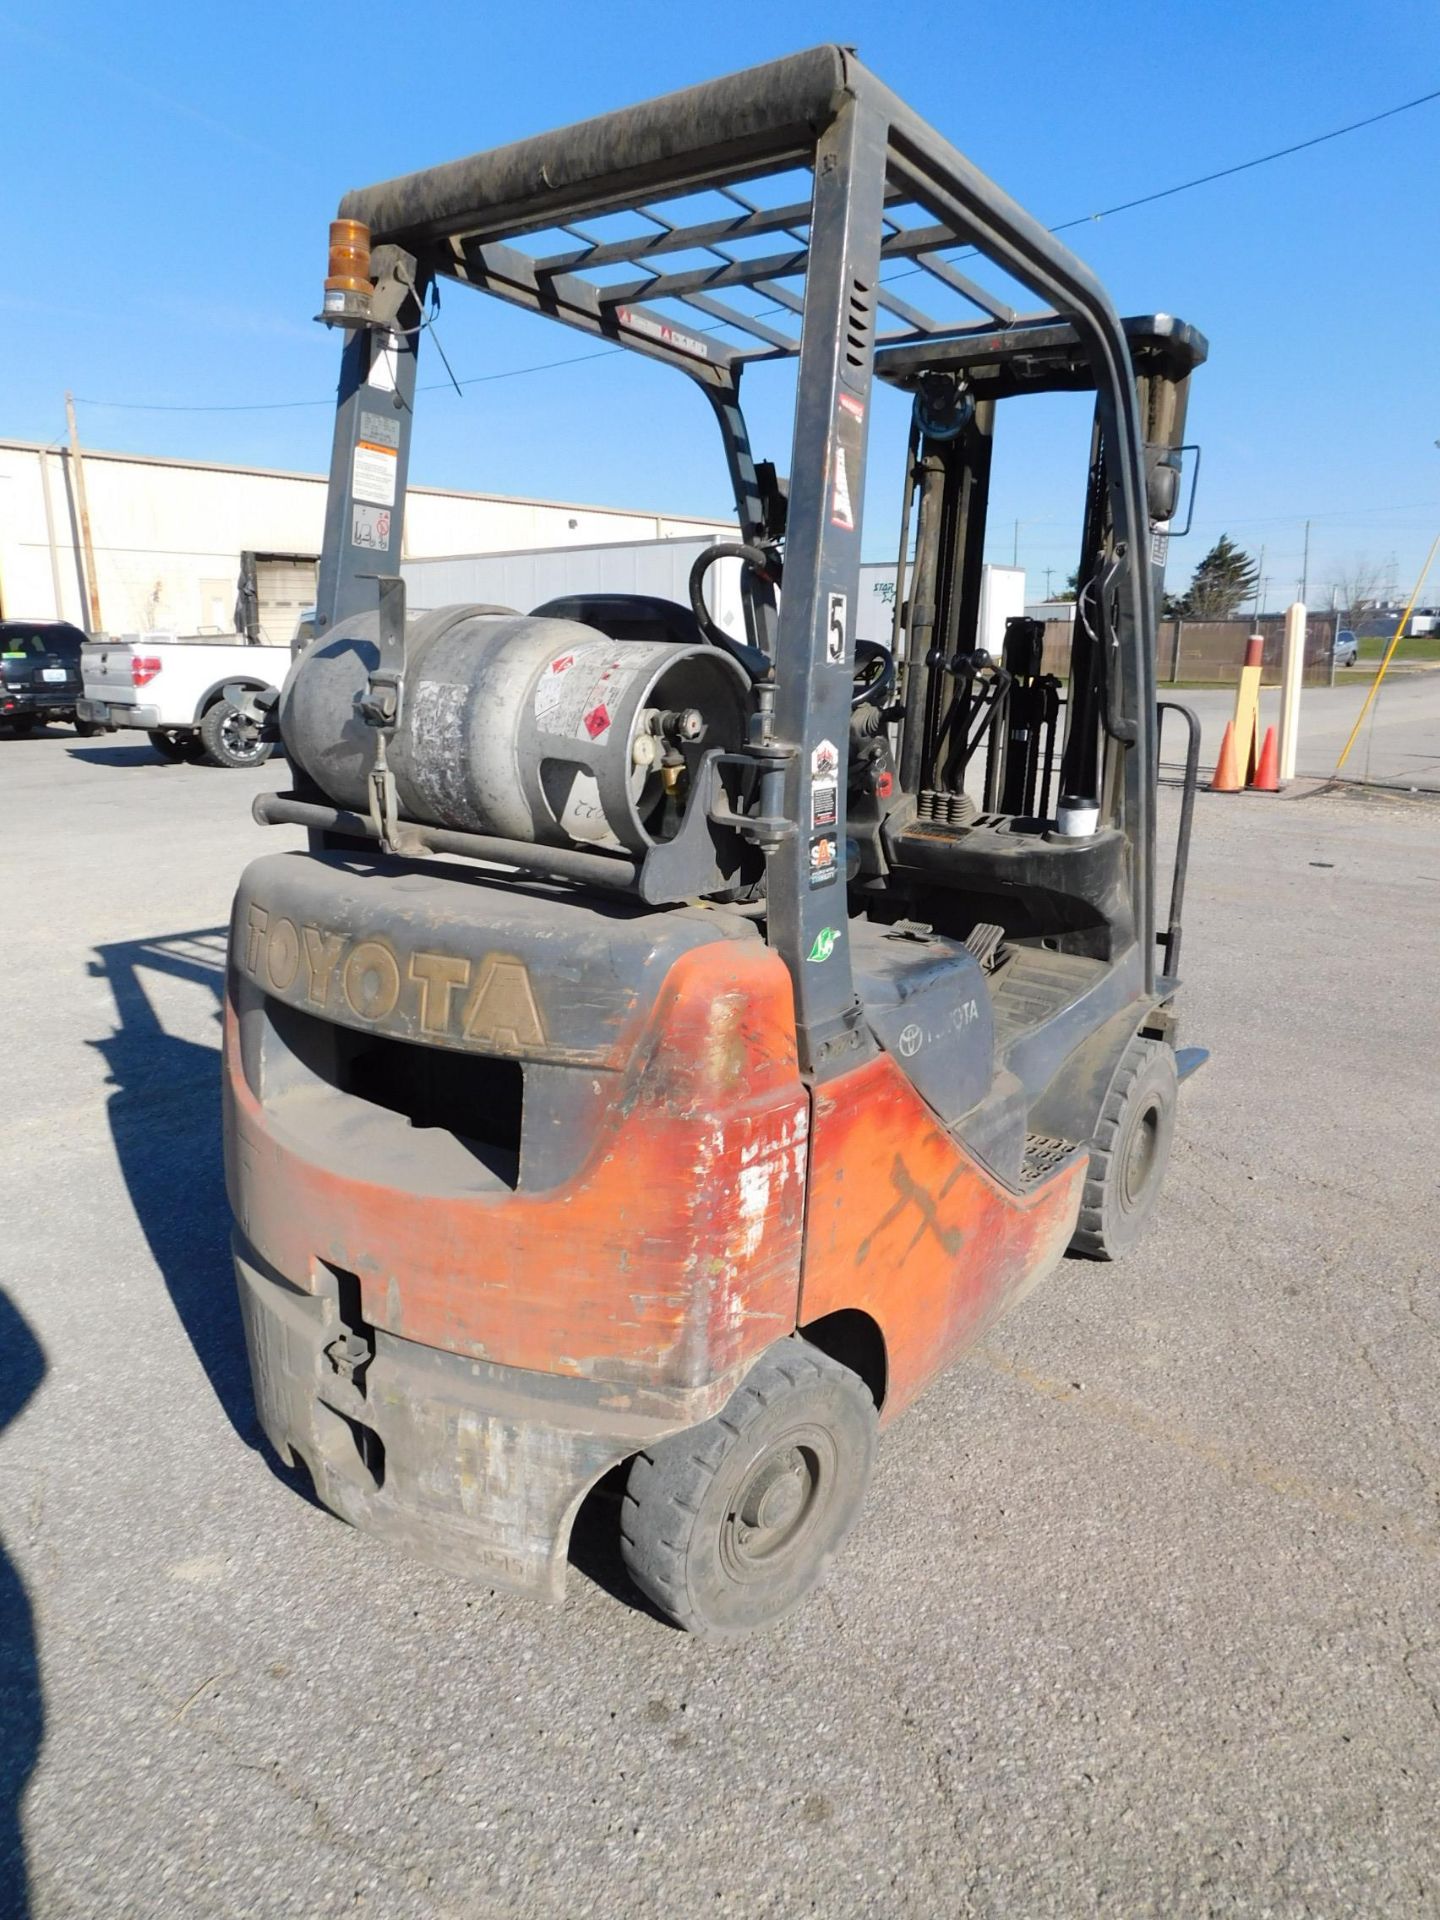 Toyota 8FGU15 Fork Lift Truck, SN 64661, 2,500 lb. Max. Load Capacity, LP Gas Engine, Overhead - Image 6 of 20